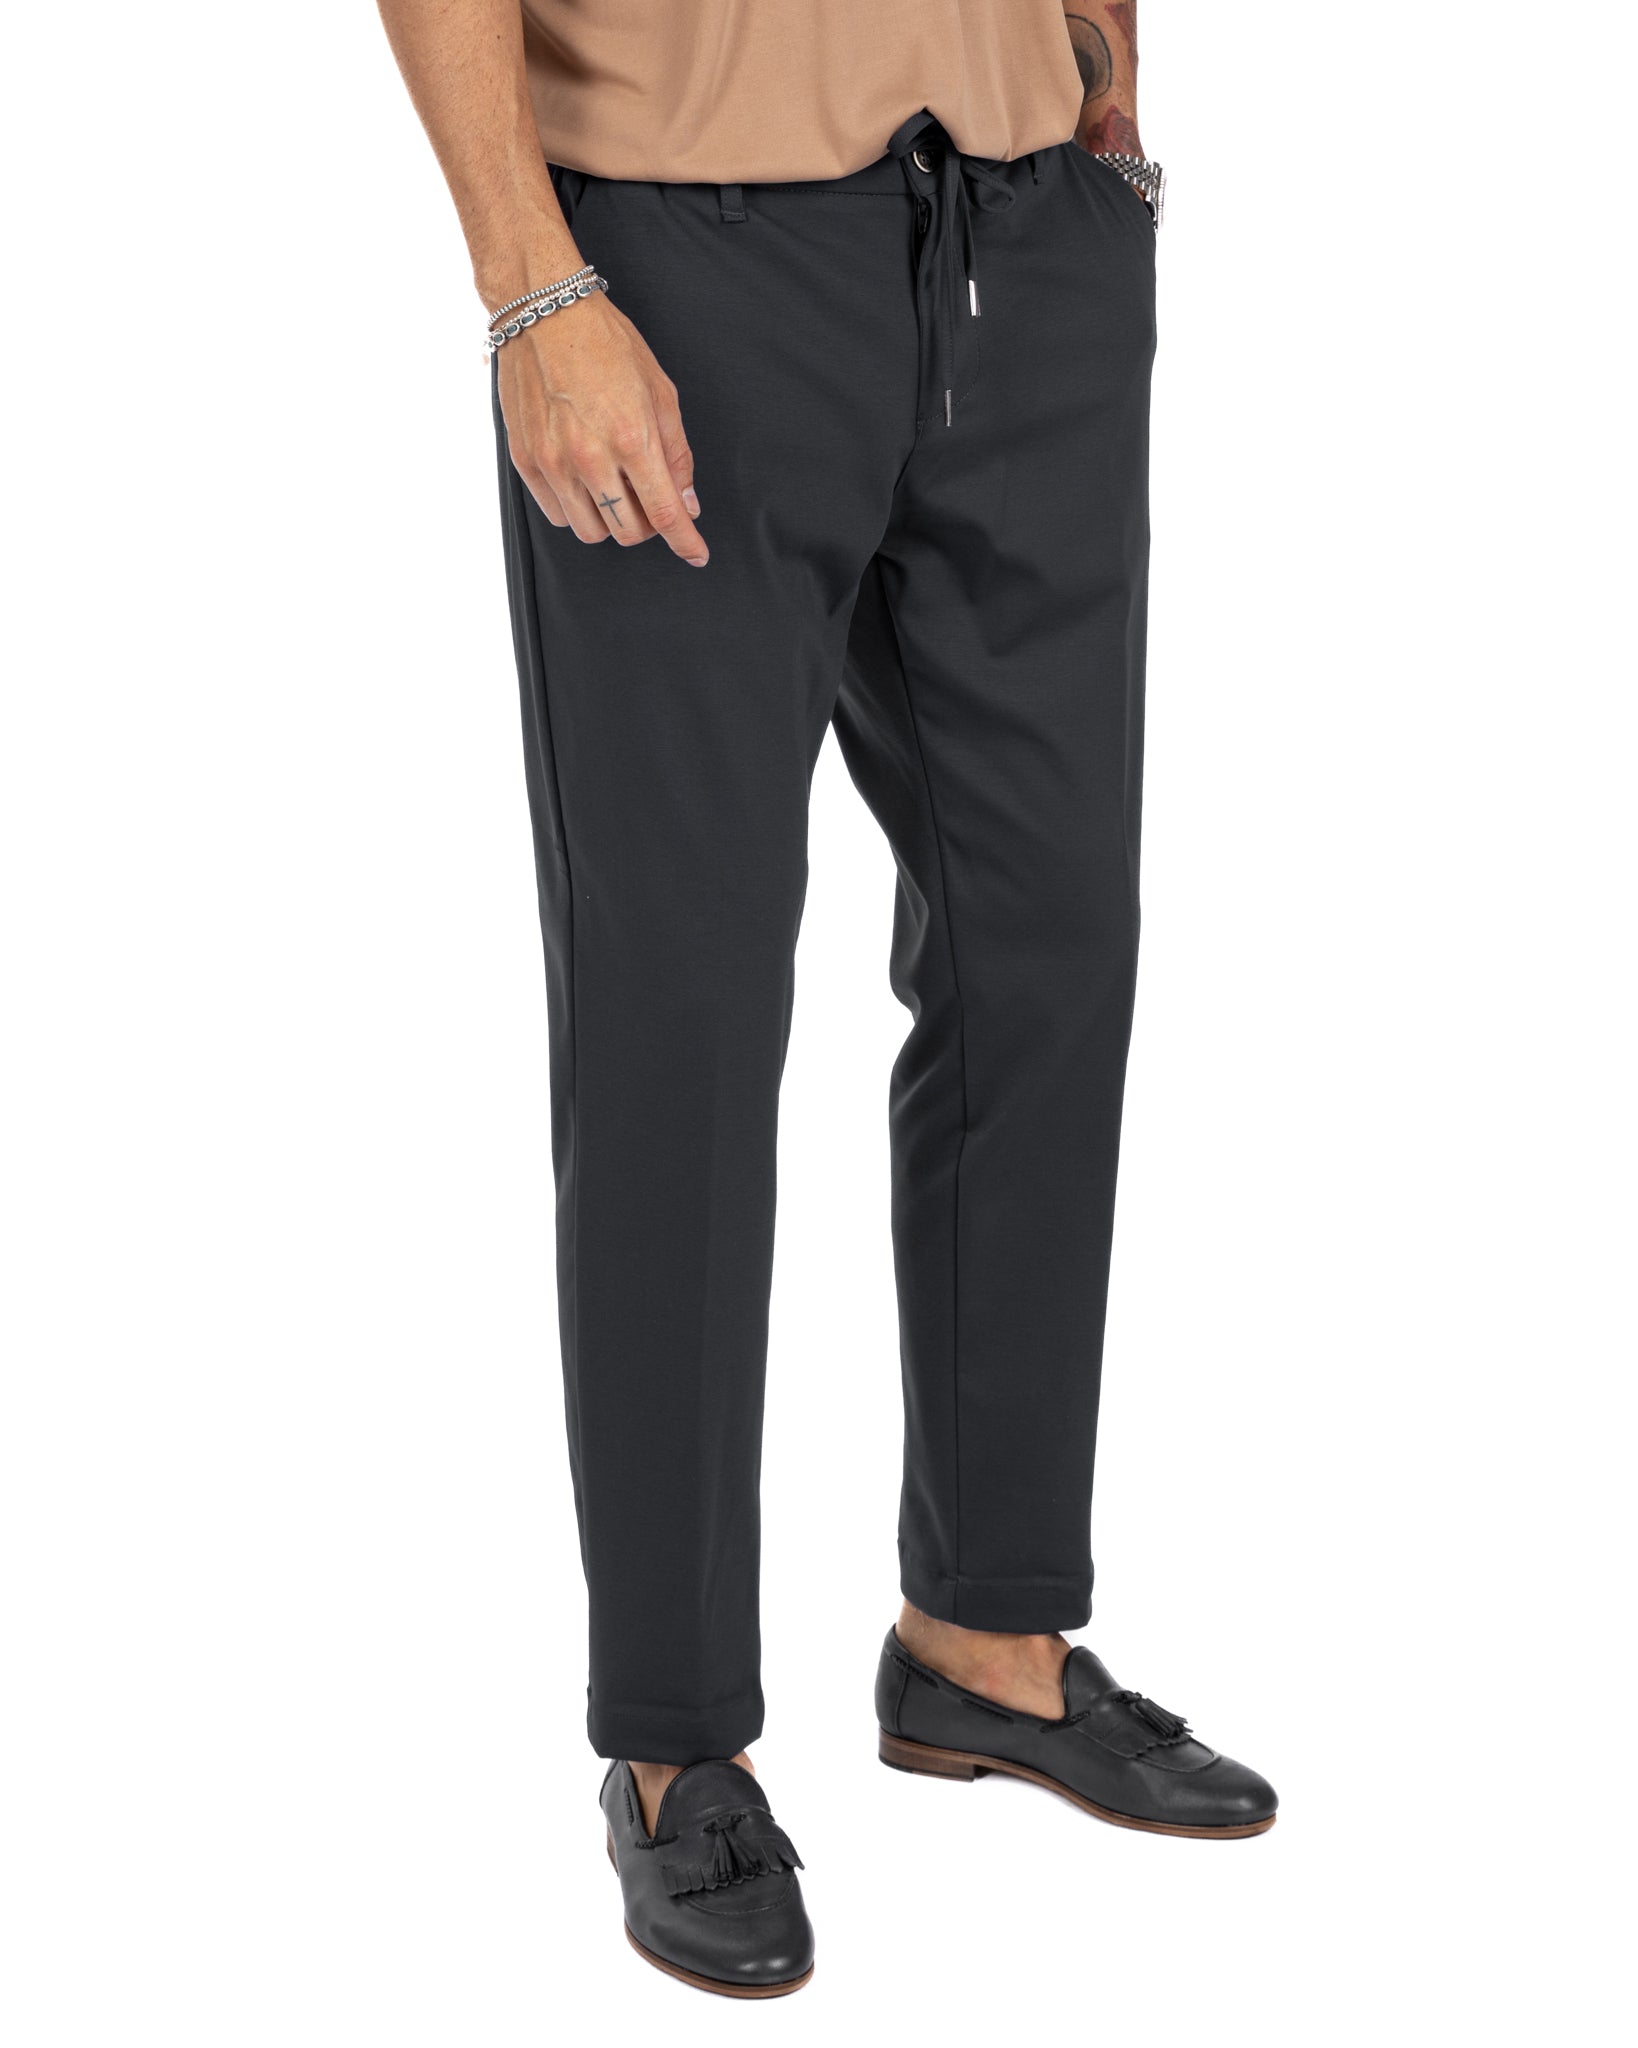 Shelby - black cotton trousers